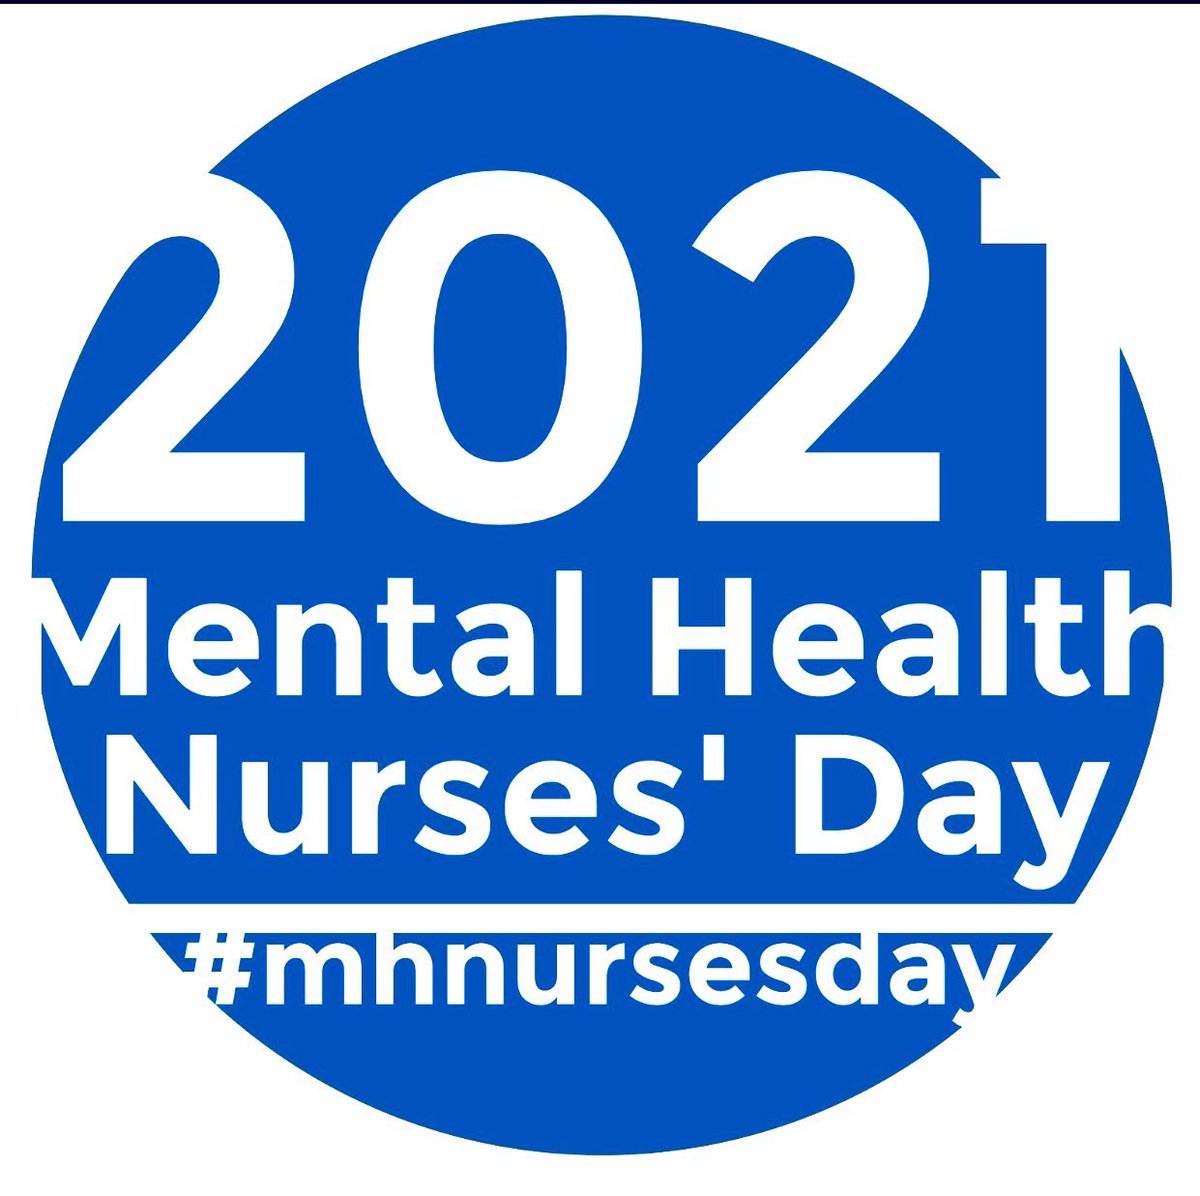 1. happy #mentalhealthnursesday to all our wonderful nurses. Our MH nurses deliver outstanding care in a variety of services and settings, including community teams, inpatient wards, and specialist units such as child and adolescent mental health services and eating disorders.